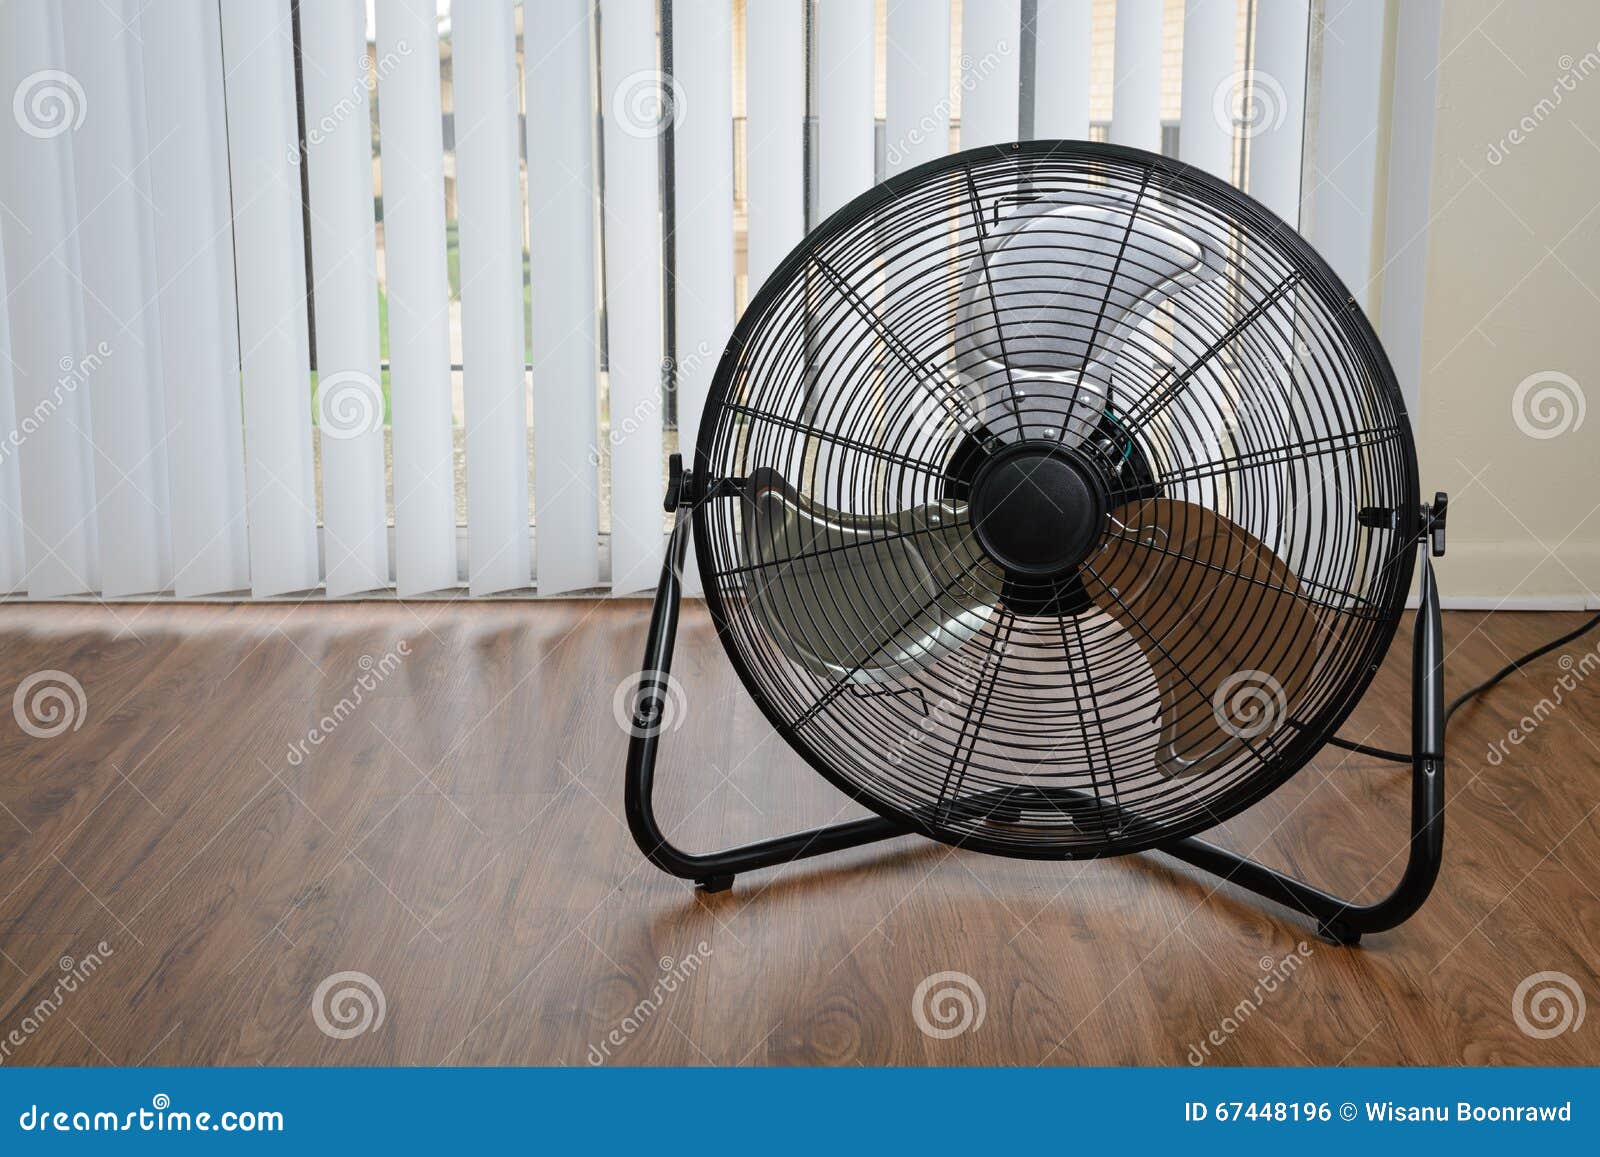 Big Ventilation Fan on Wooden Stock Photo Image strong, 67448196